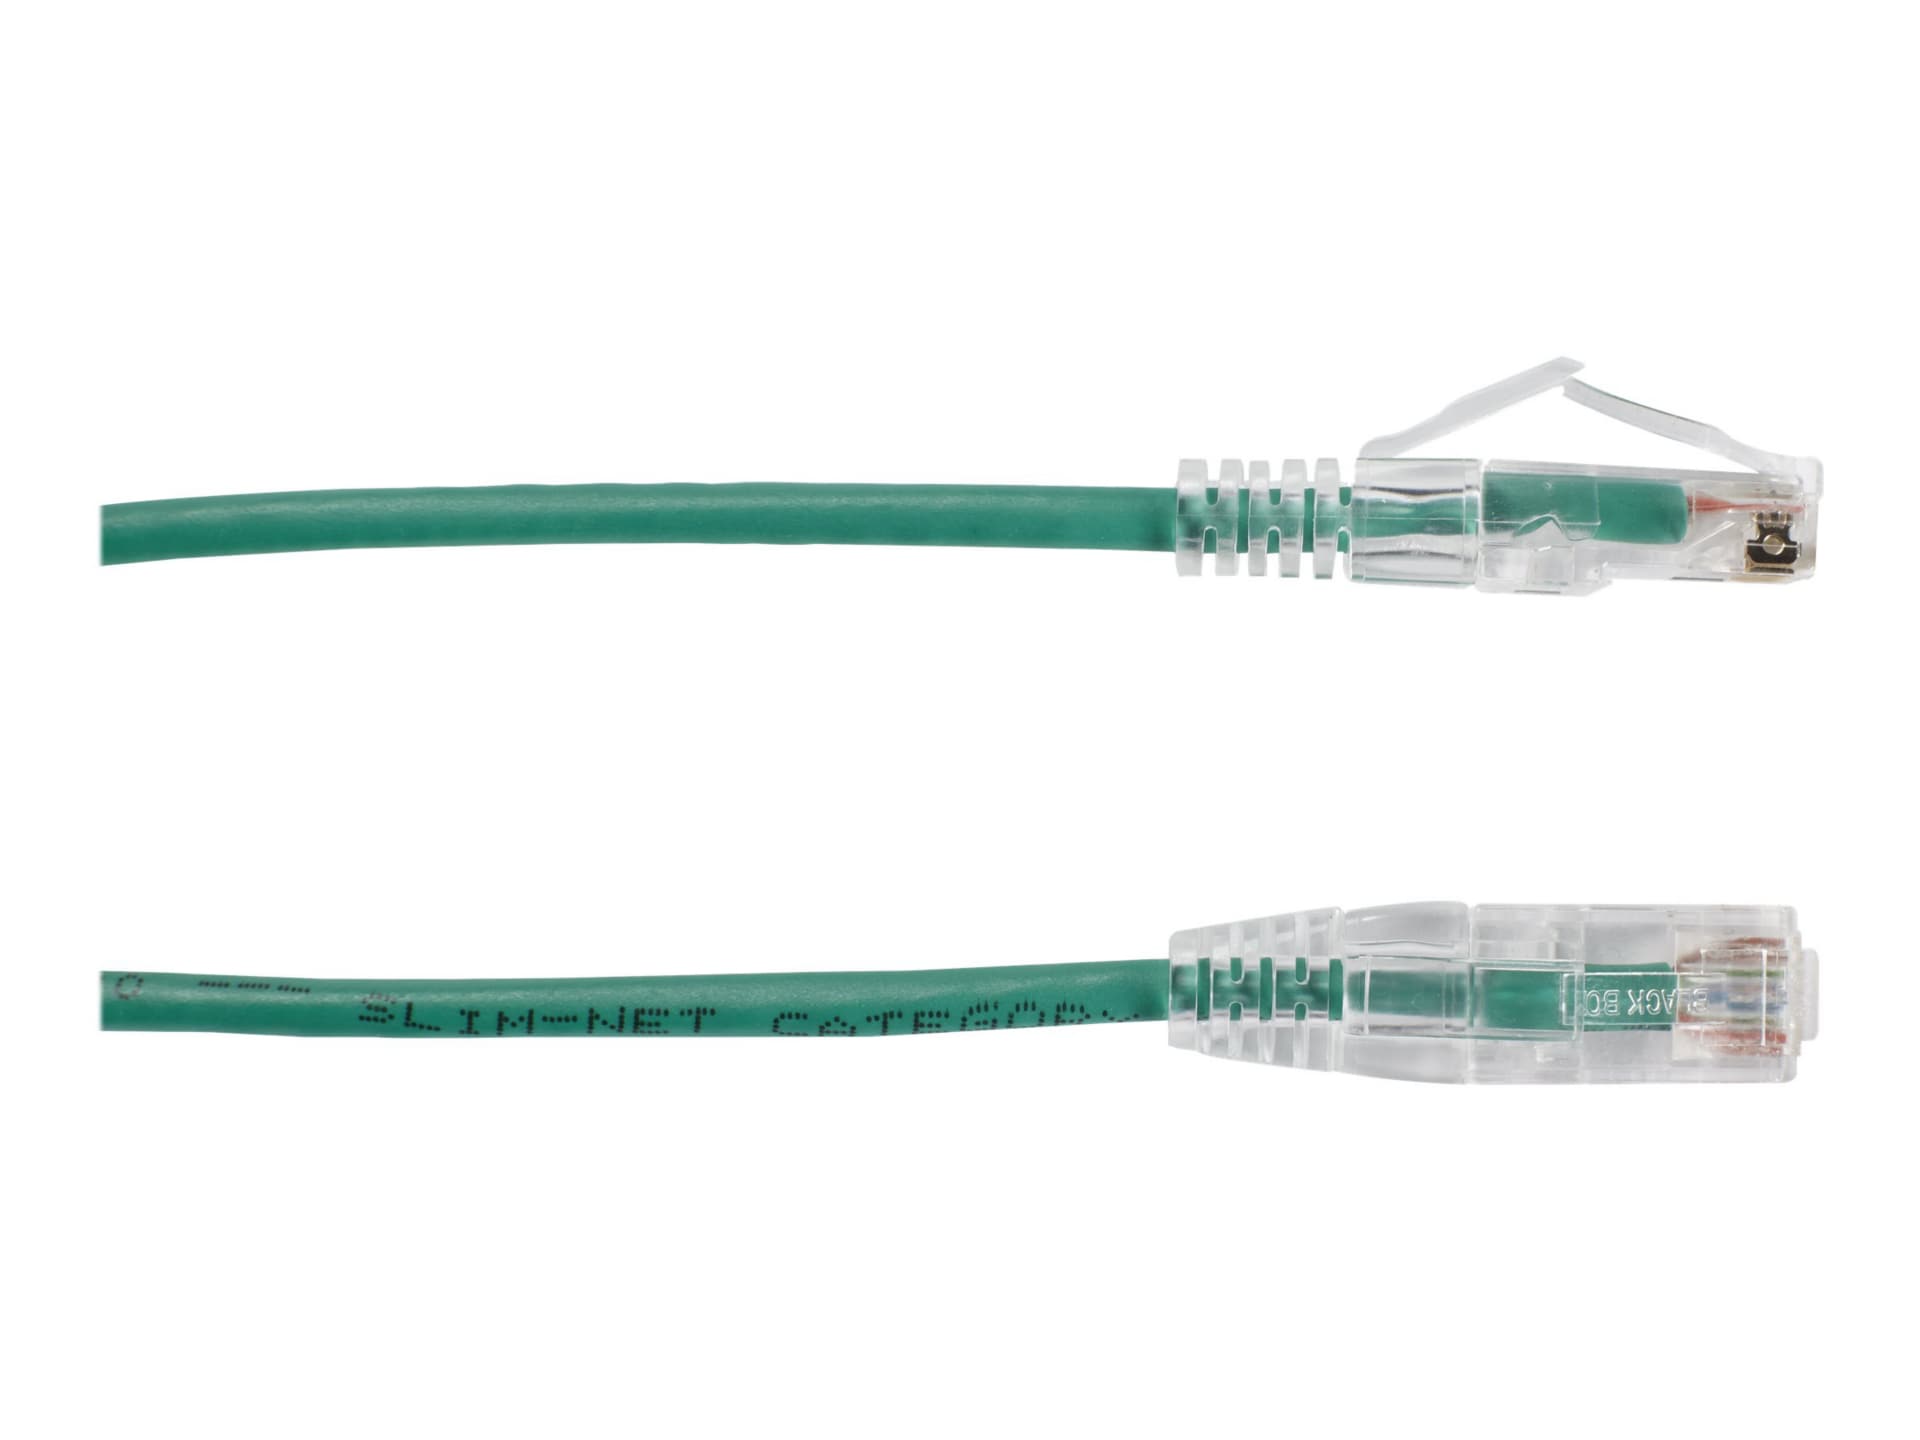 Black Box Slim-Net patch cable - 10 ft - green